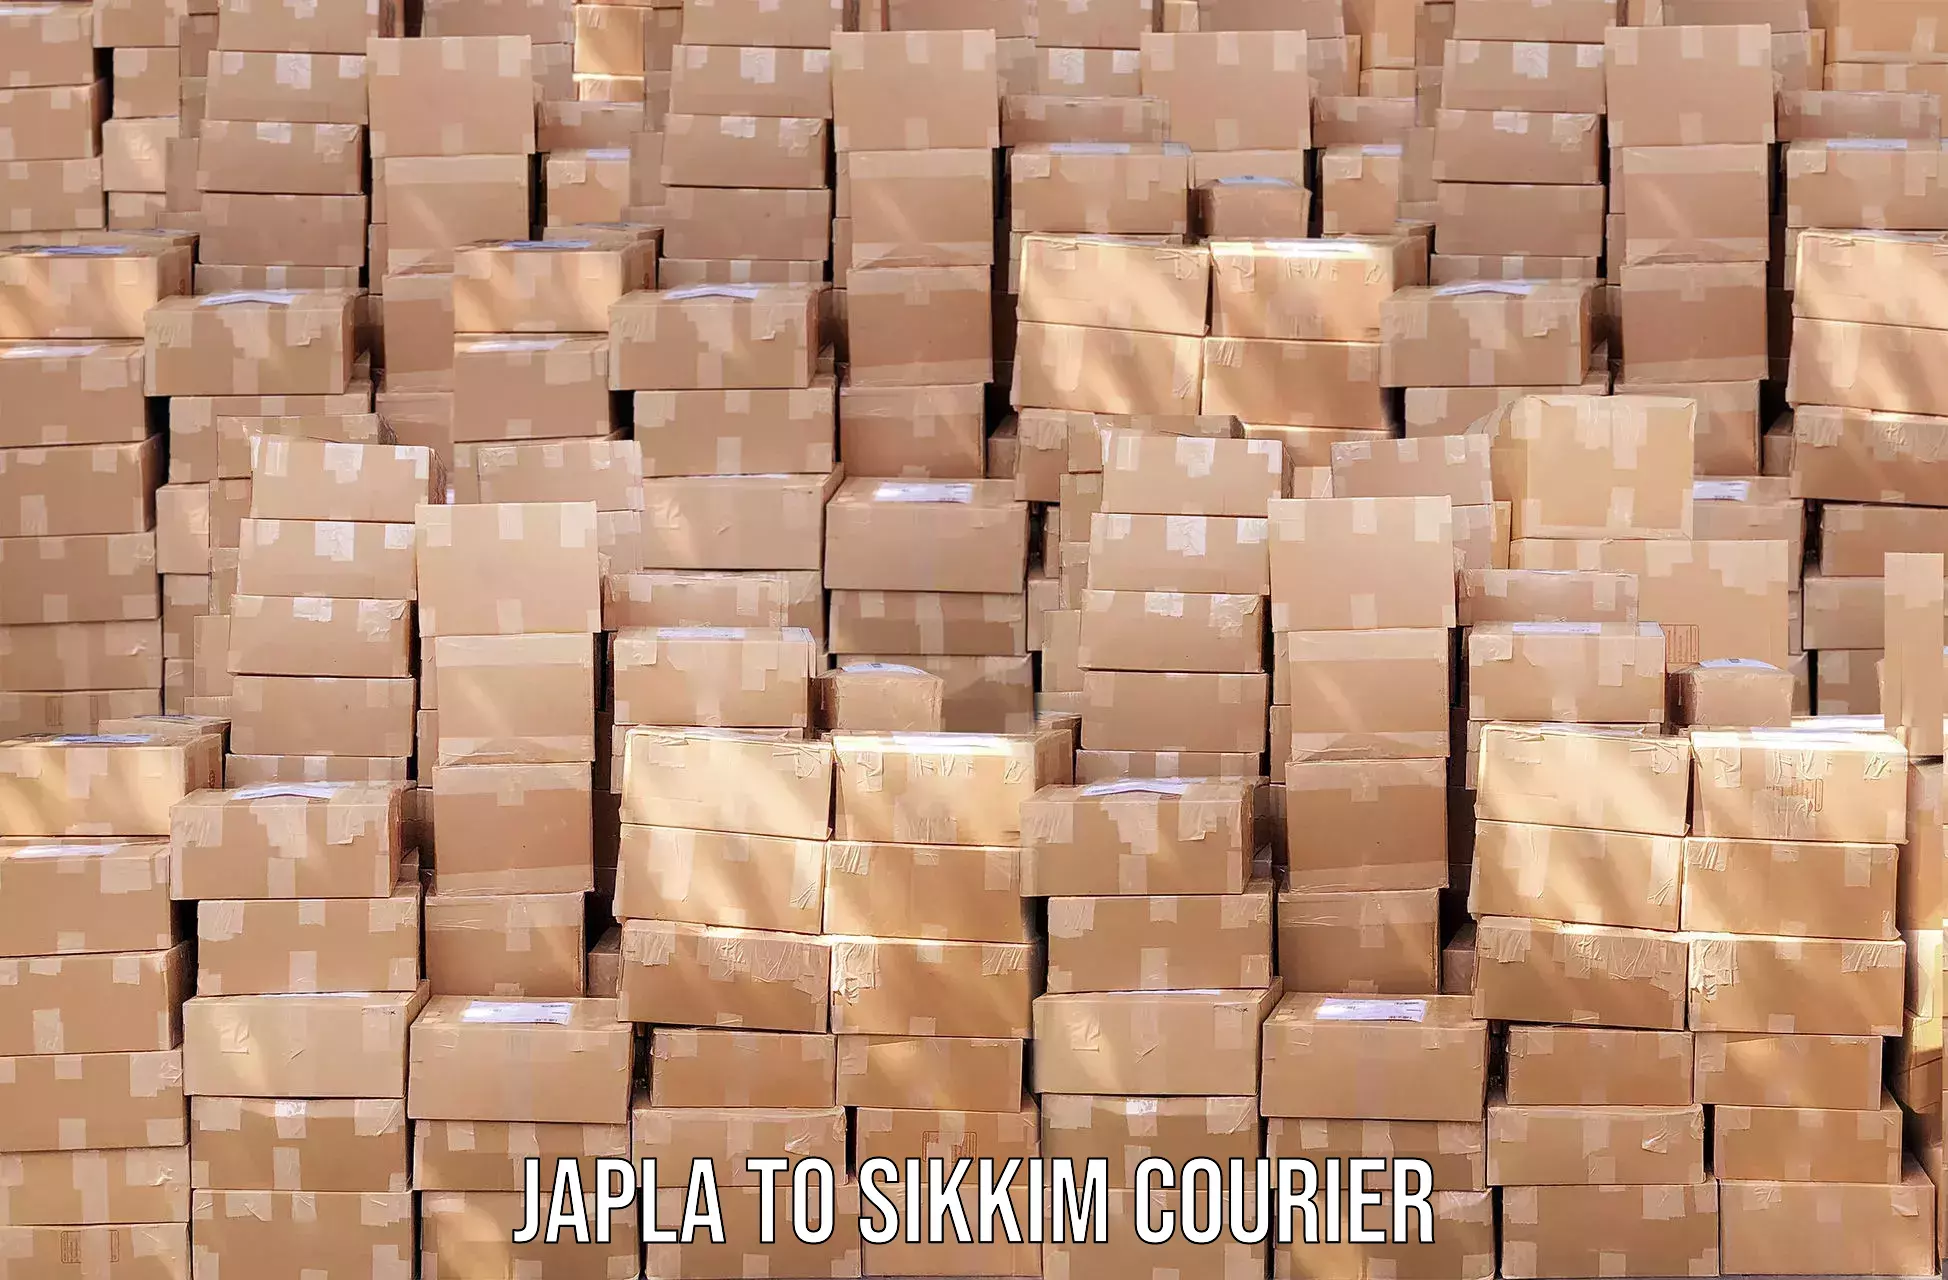 Digital shipping tools Japla to East Sikkim